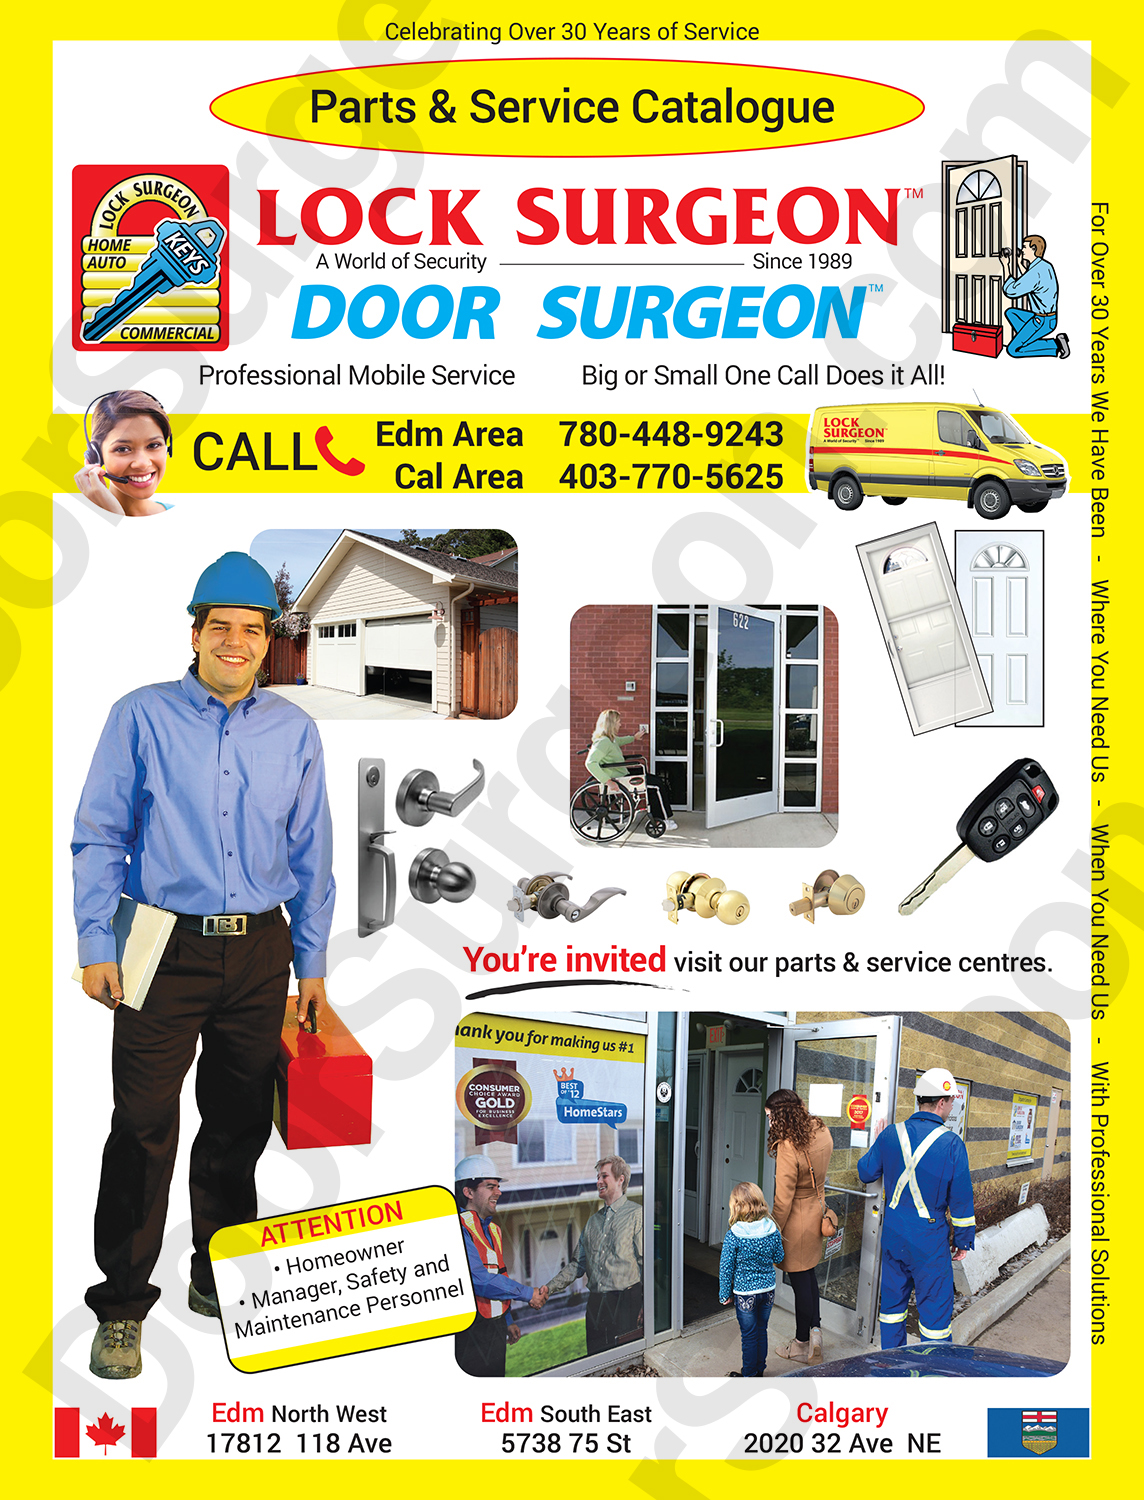 Door Surgeon service centres staffed with trained locksmiths security solutions locking hardware.